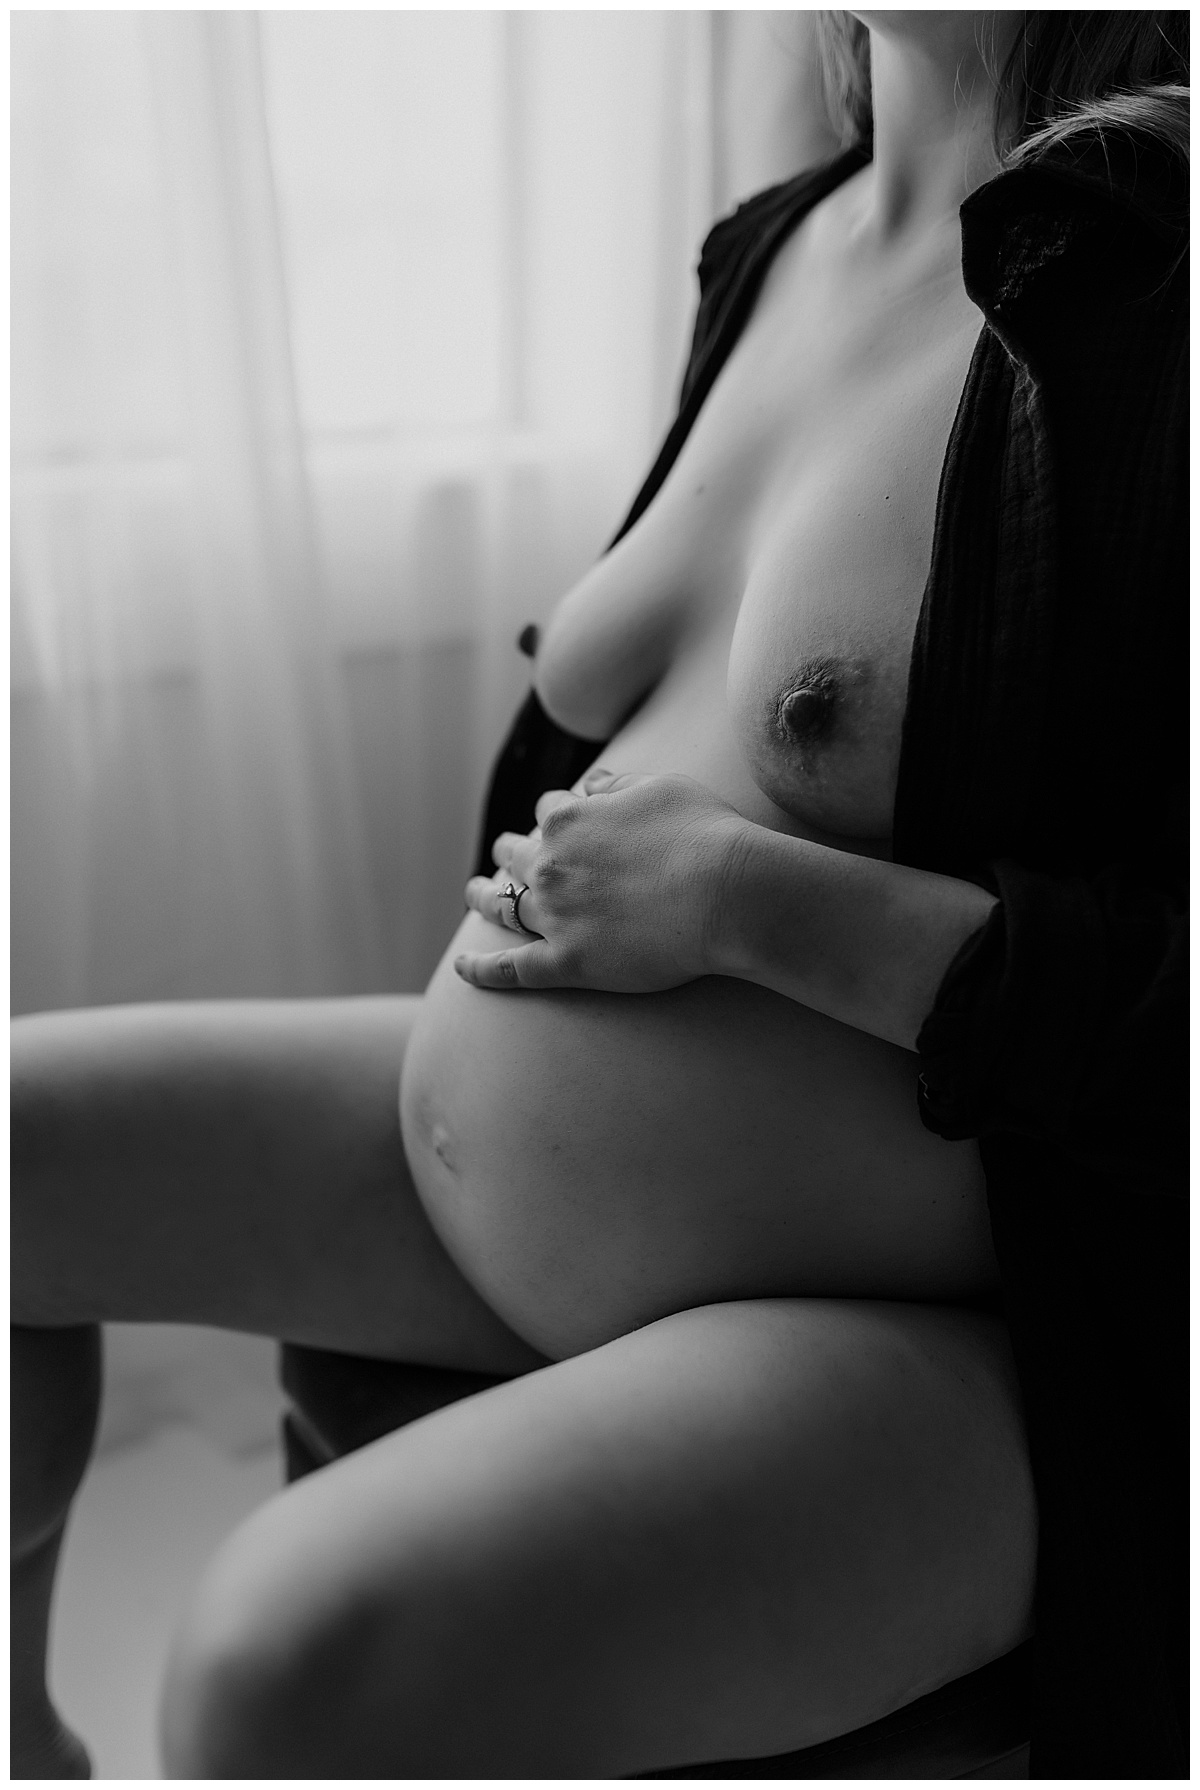 Pregnant lady grabs belly softy for Maternity Boudoir session